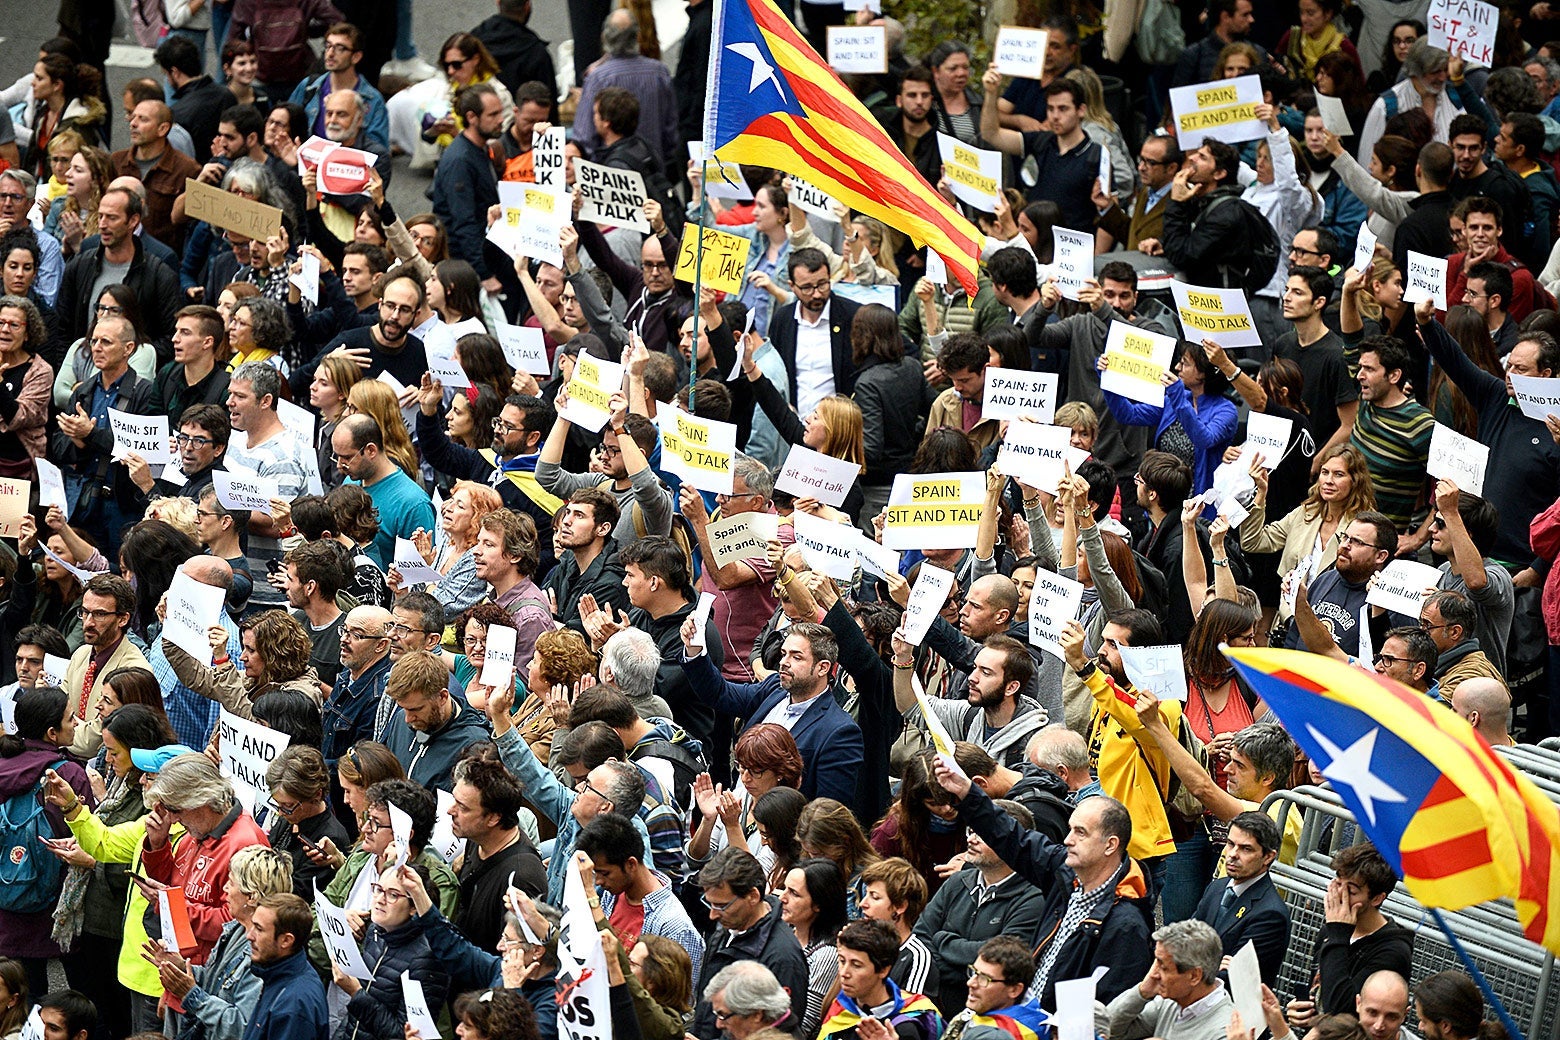 People hold placards reading "Spain: Sit and Talk" on Monday in Barcelona.